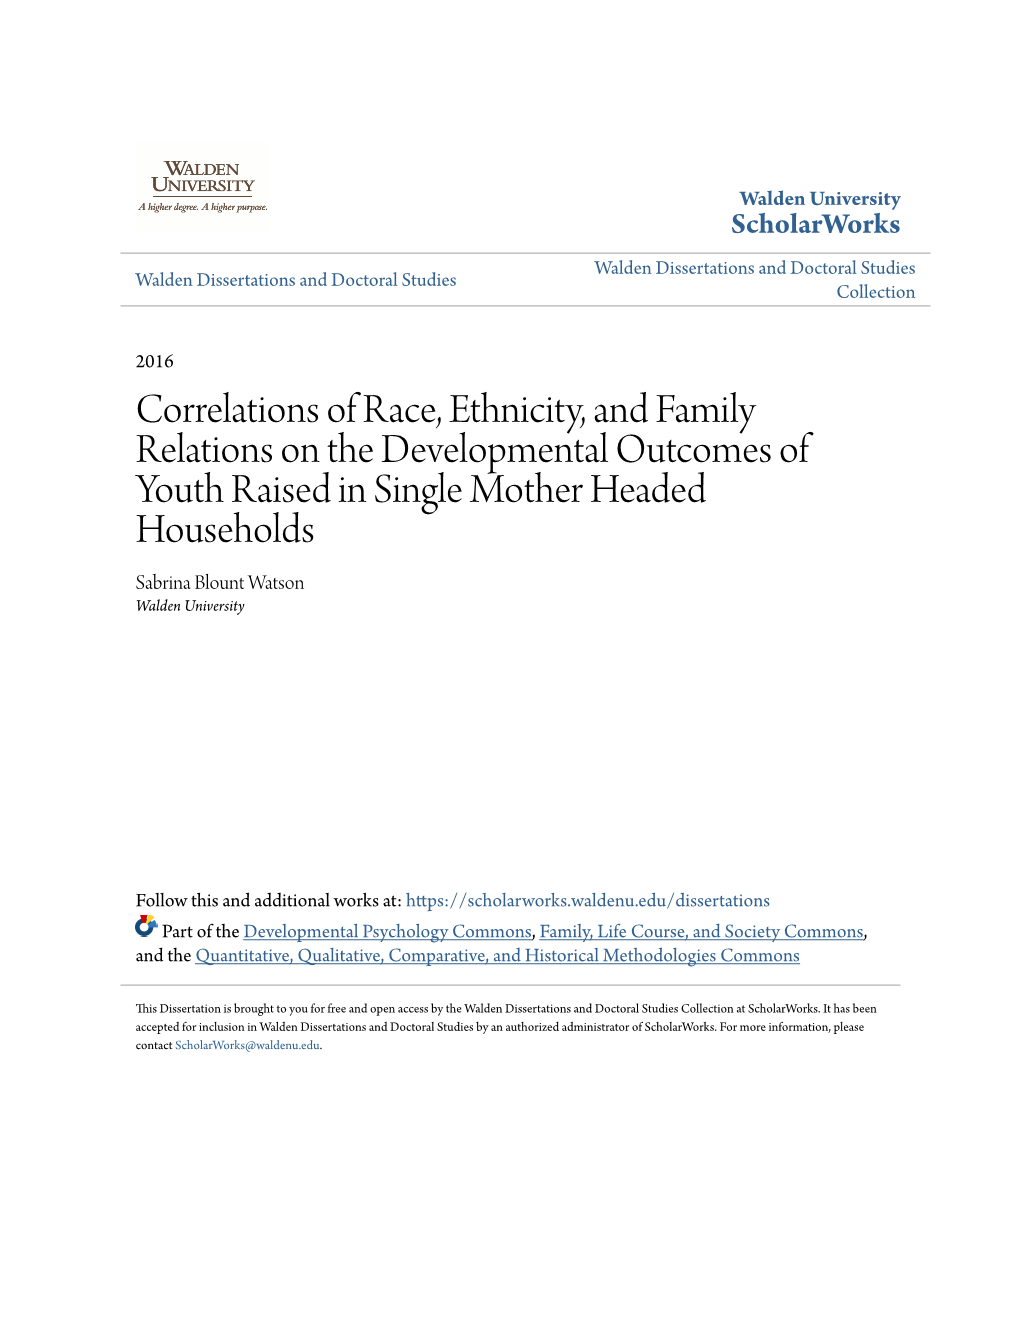 Correlations of Race, Ethnicity, and Family Relations on the Developmental Outcomes of Youth Raised in Single Mother Headed Hous